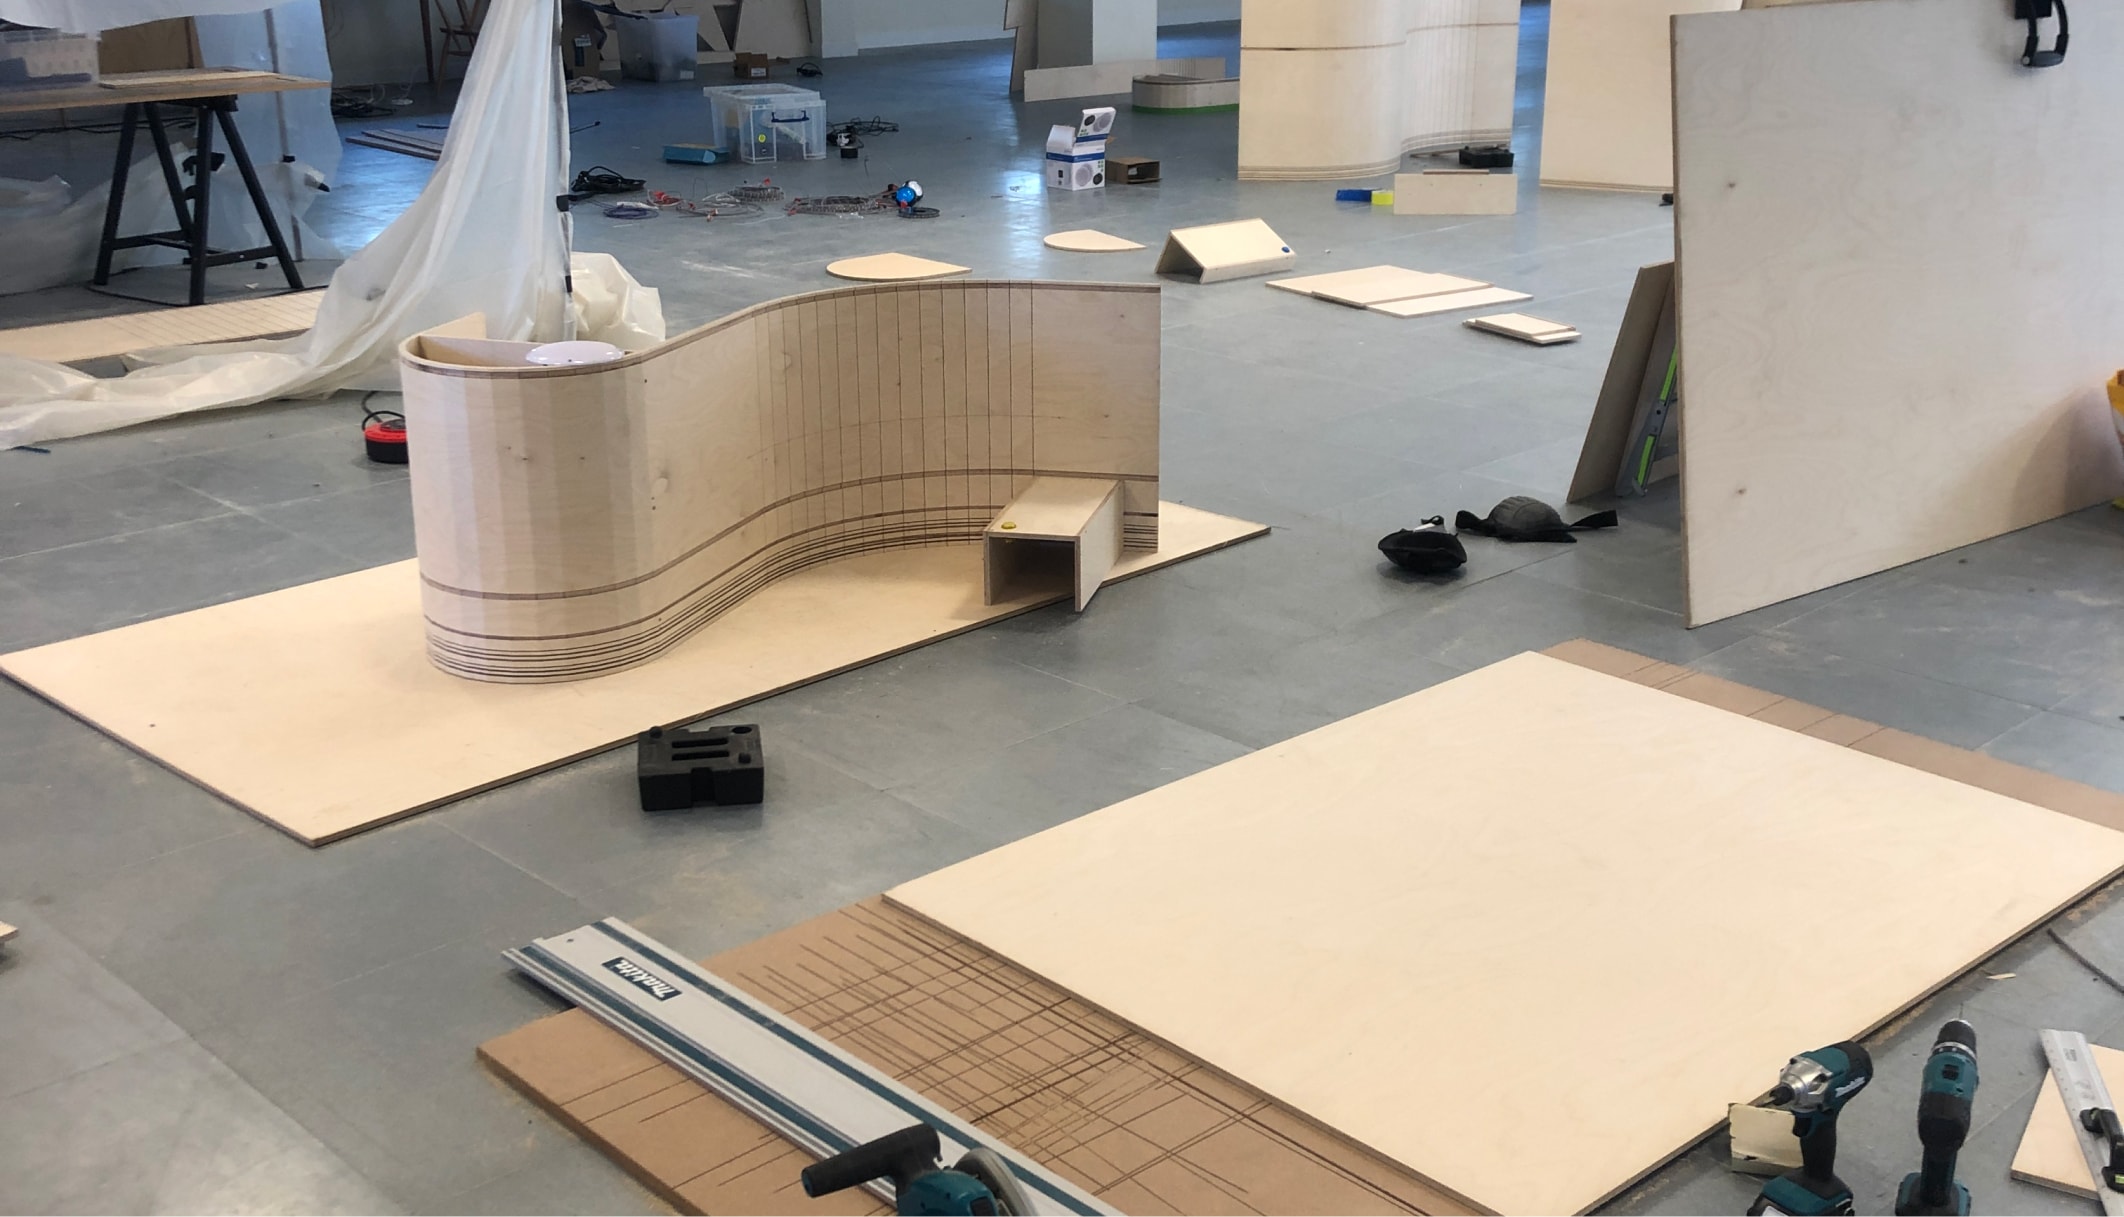 Wood panels are laid out over a floor with one upright folded into the shape of a curve